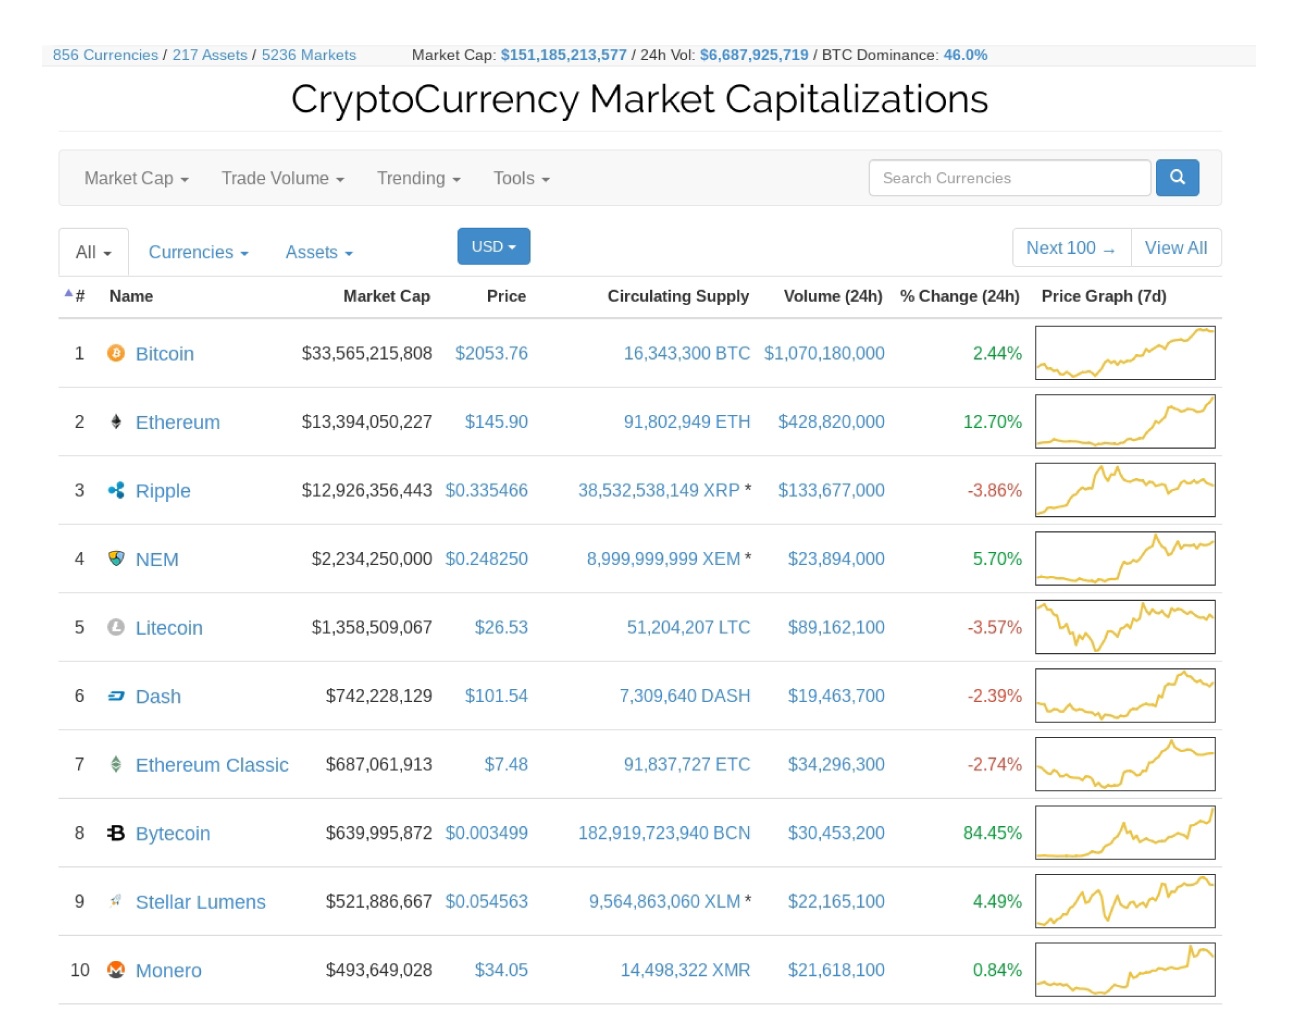 10 Best Cryptocurrencies To Buy In March – Forbes Advisor INDIA